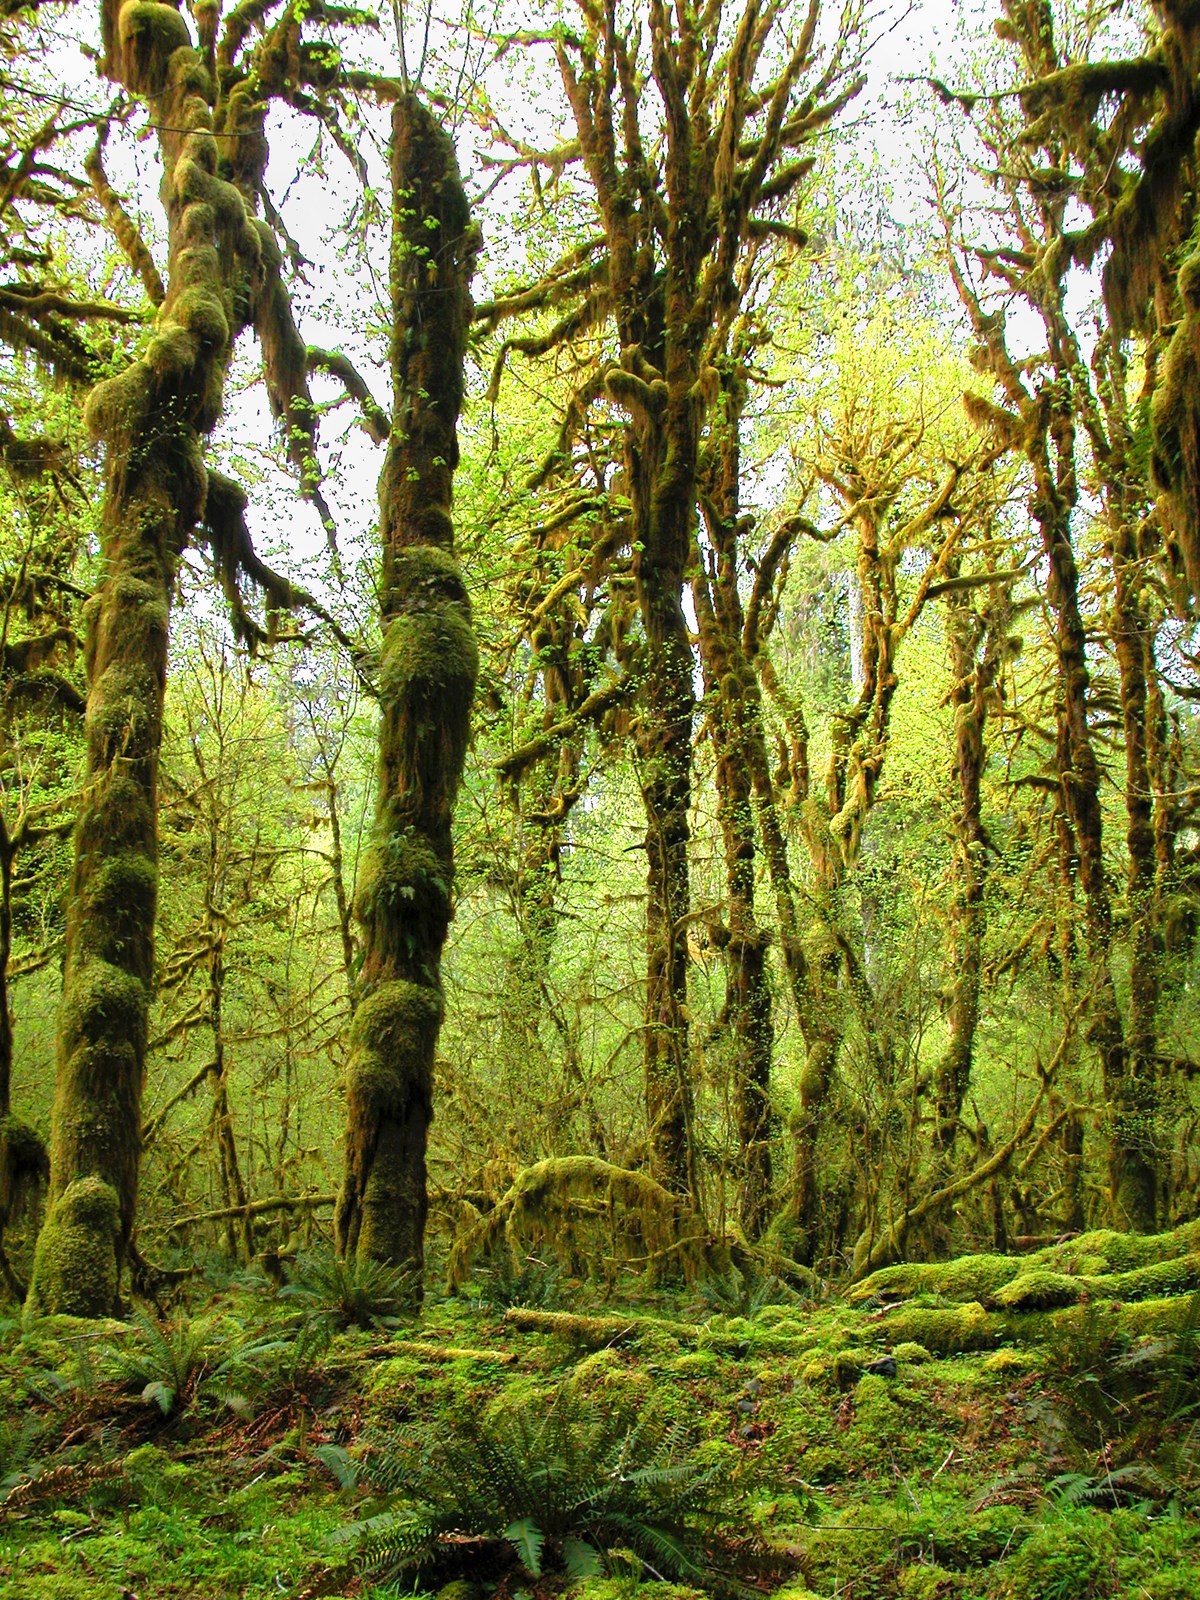 Forest of moss-covered trees with ferns in the foreground.